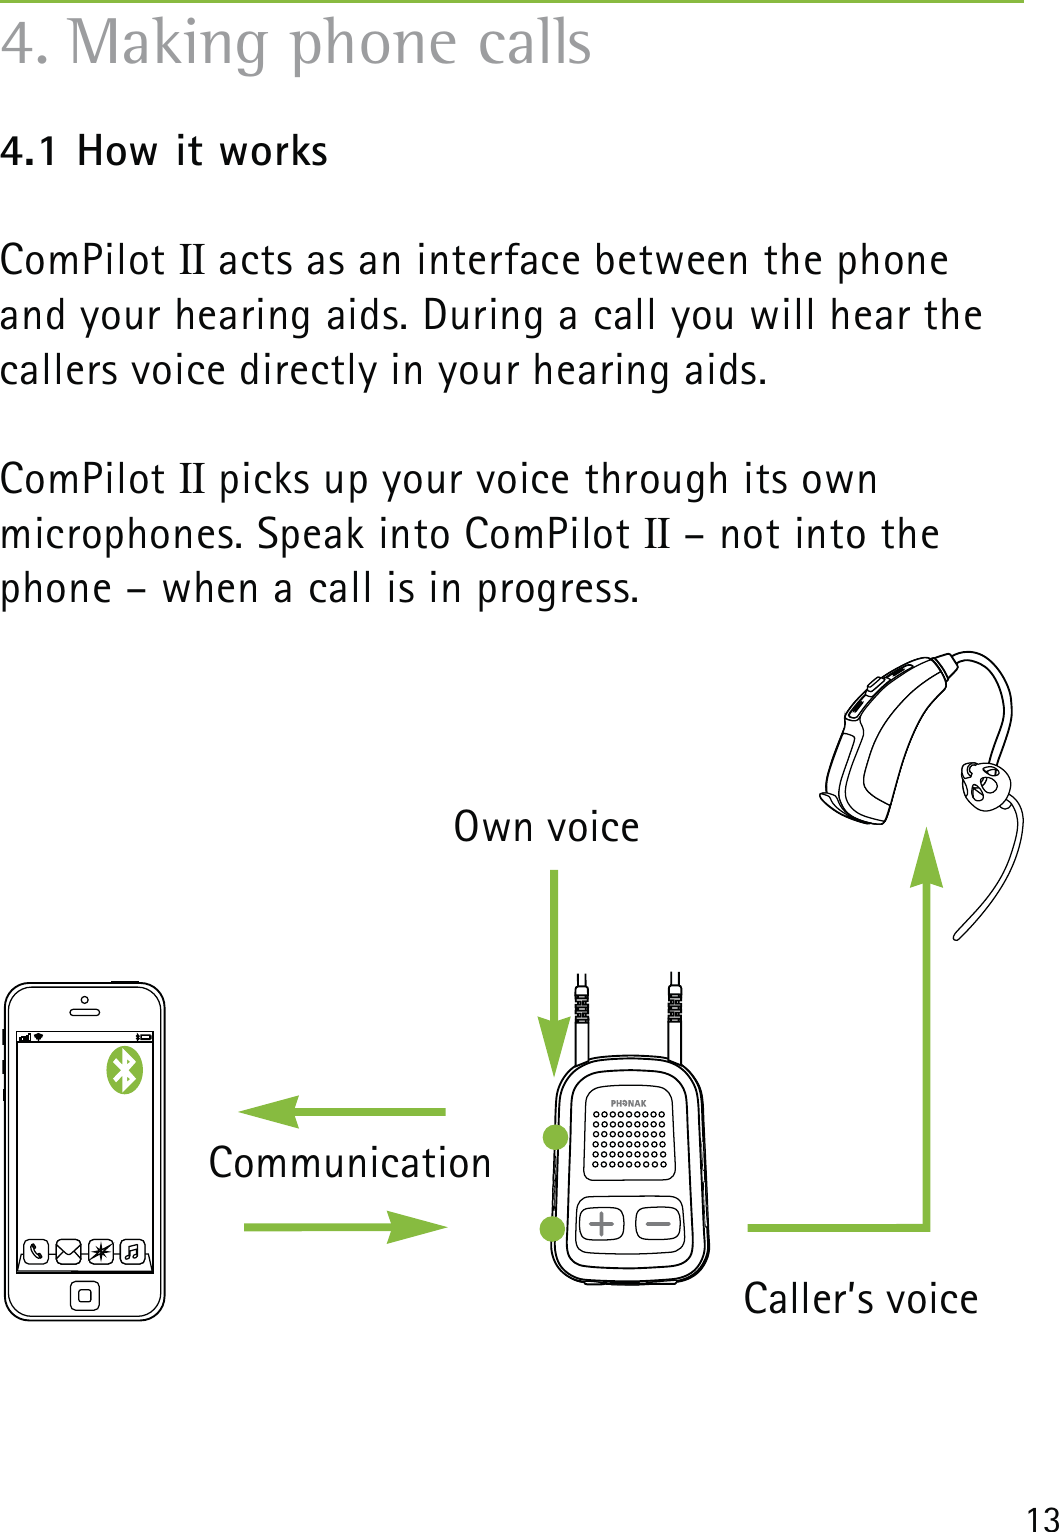 134.1 How it worksComPilot II acts as an interface between the phone and your hearing aids. During a call you will hear the callers voice directly in your hearing aids. ComPilot II picks up your voice through its own  microphones. Speak into ComPilot II – not into the phone – when a call is in progress. 4. Making phone calls Own voiceCaller’s voiceCommunication